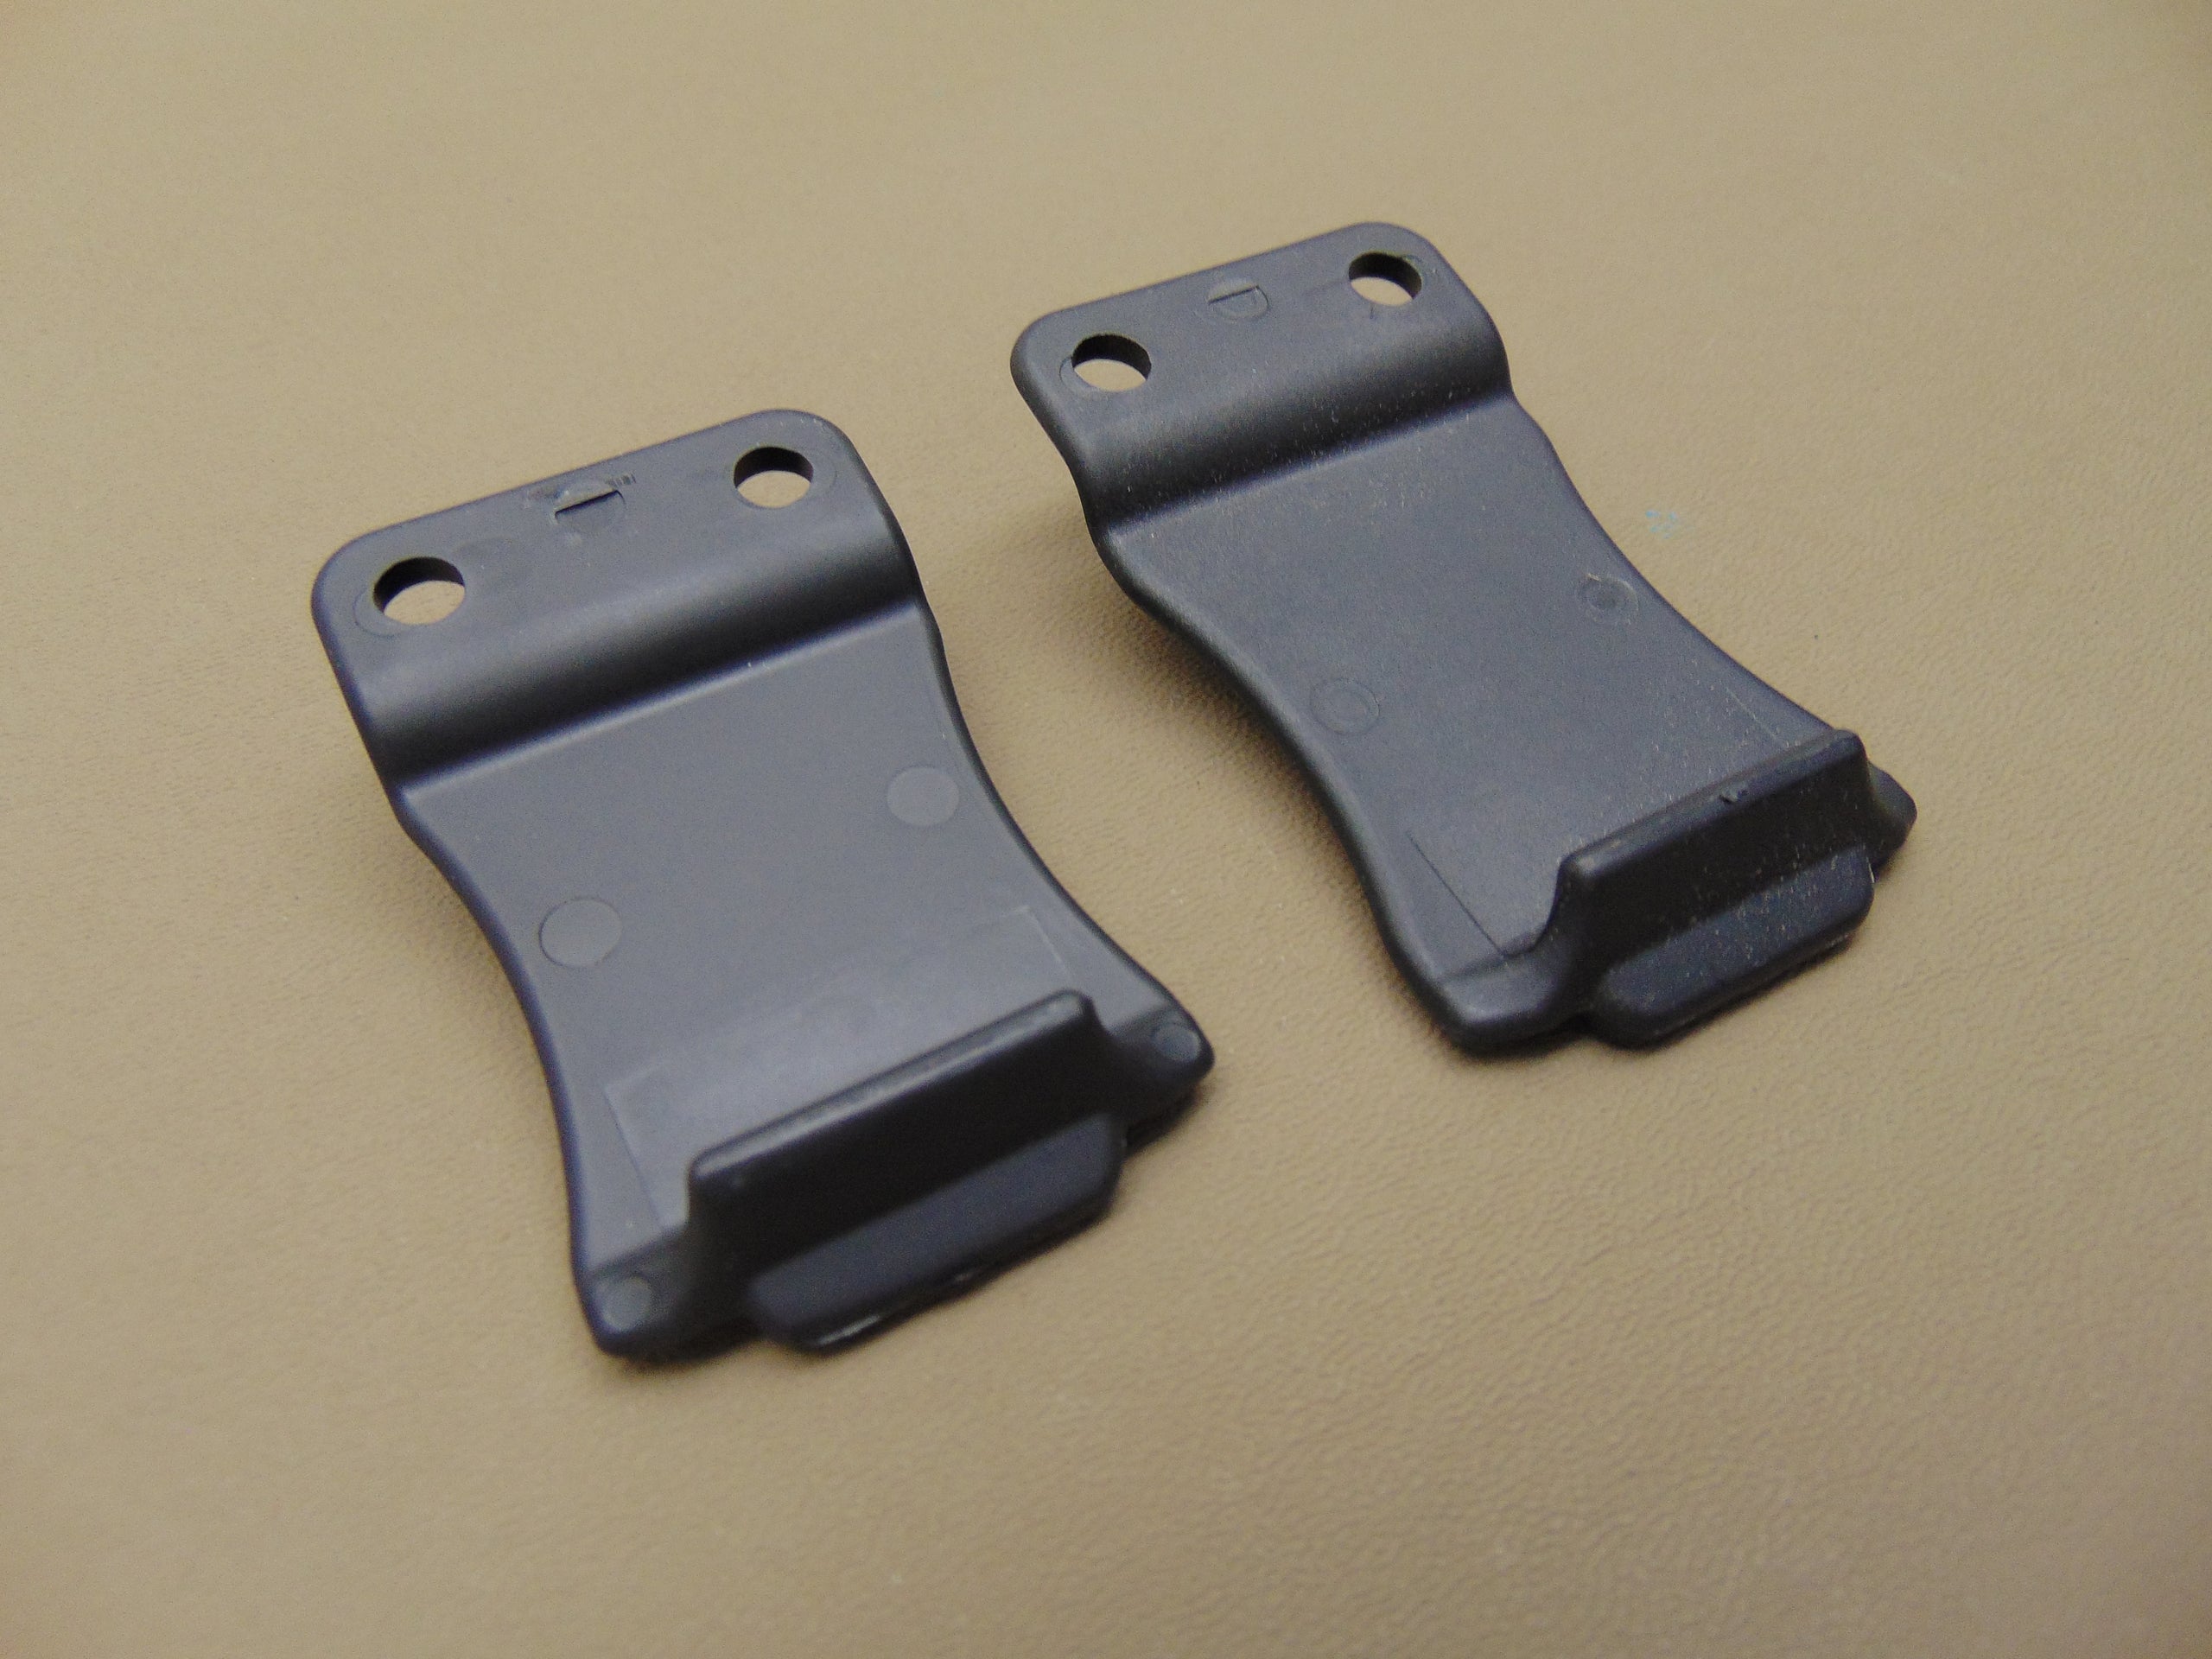 Belt Clips and Parts